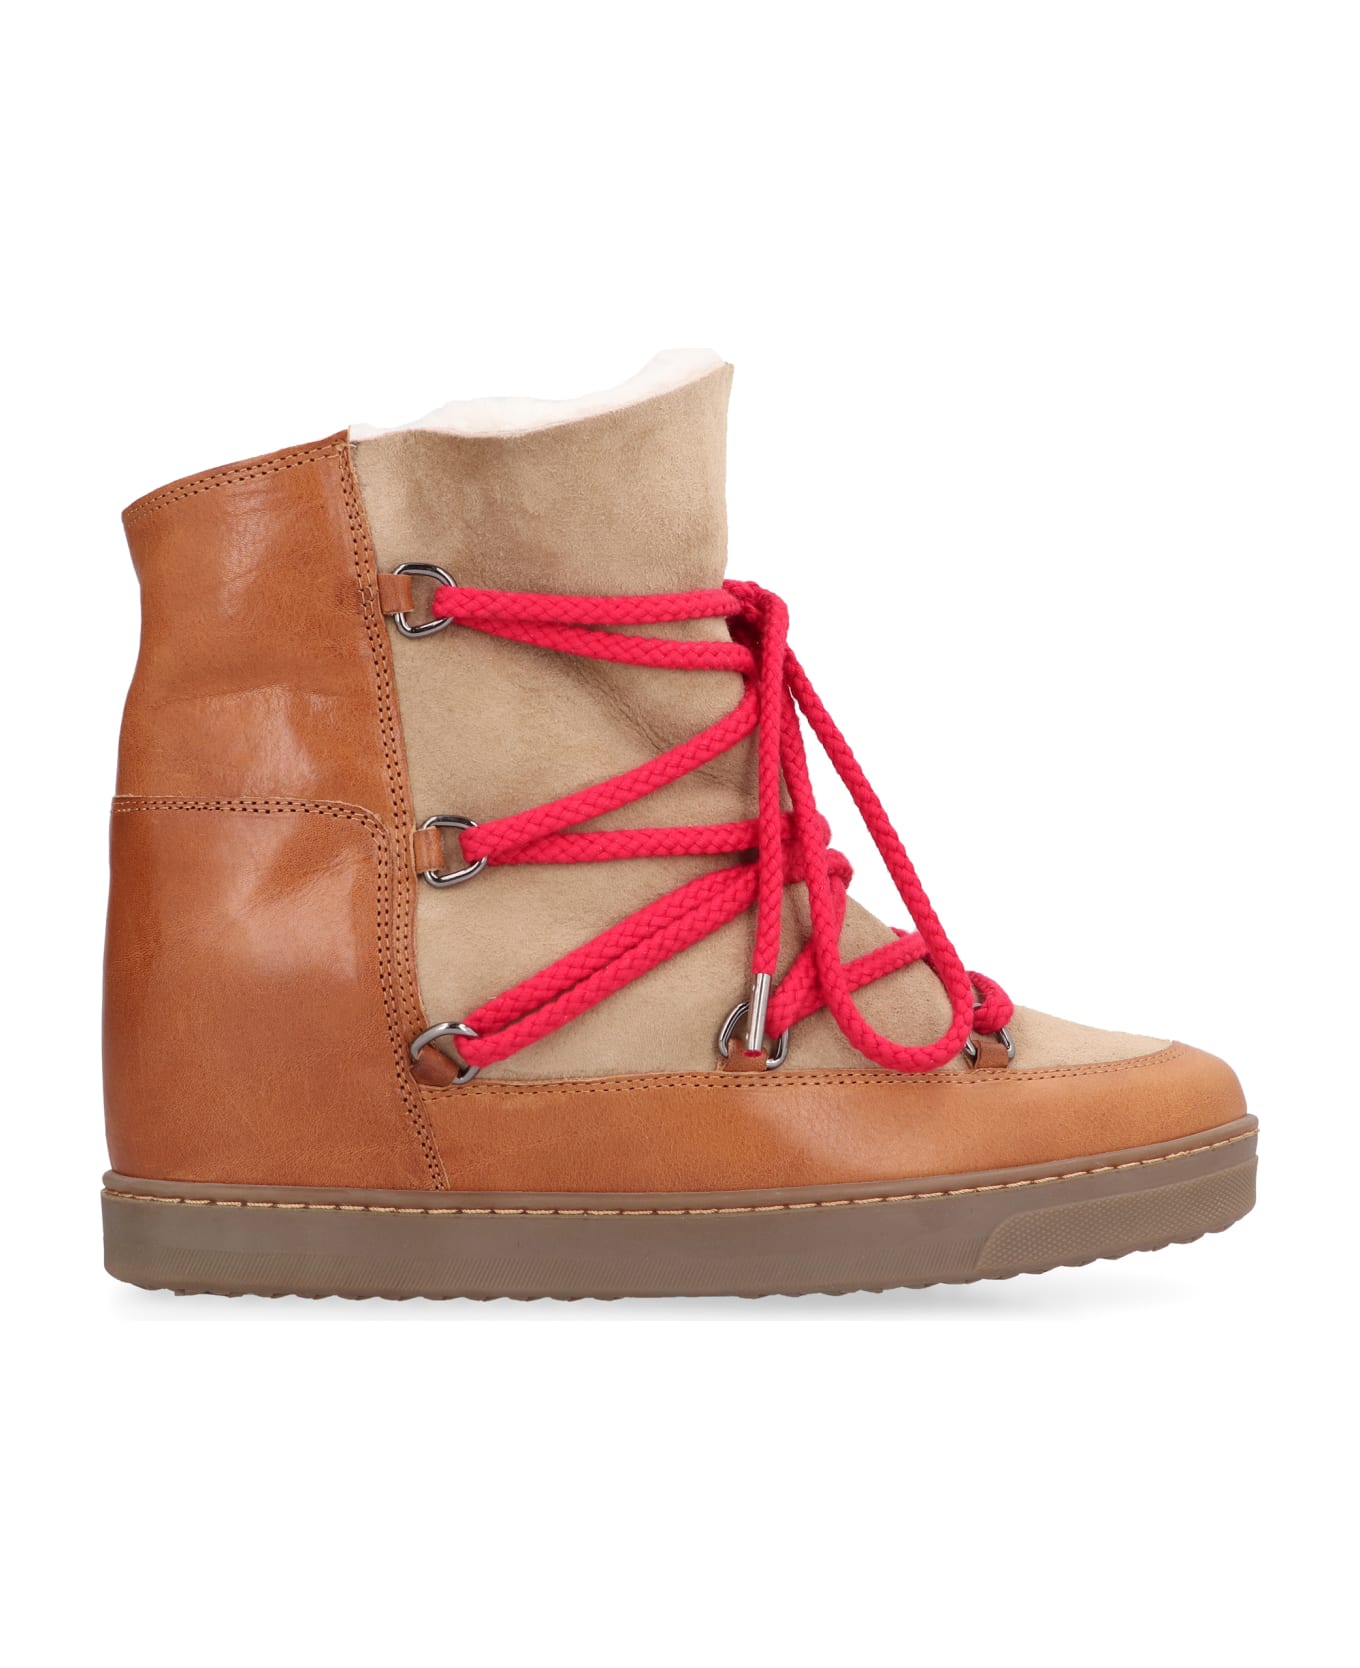 Isabel Marant Nowles Hiking Boots - NEUTRALS